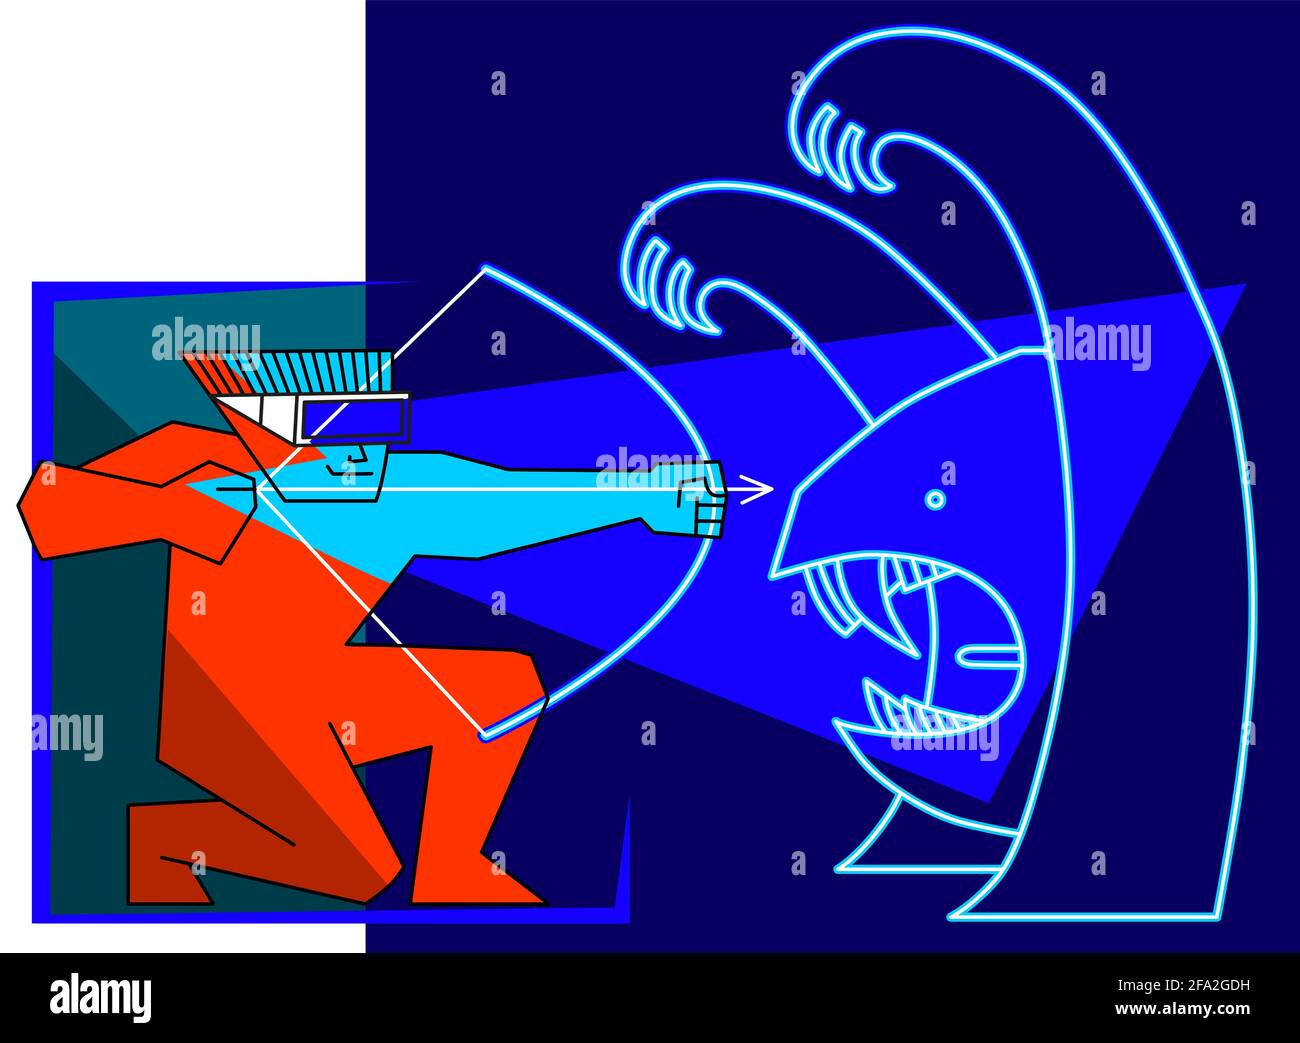 A man in virtual reality glasses archery a bow at a monster from virtual space. Suprematist composition in contrasting colors: dark blue, azure, red. Stock Vector